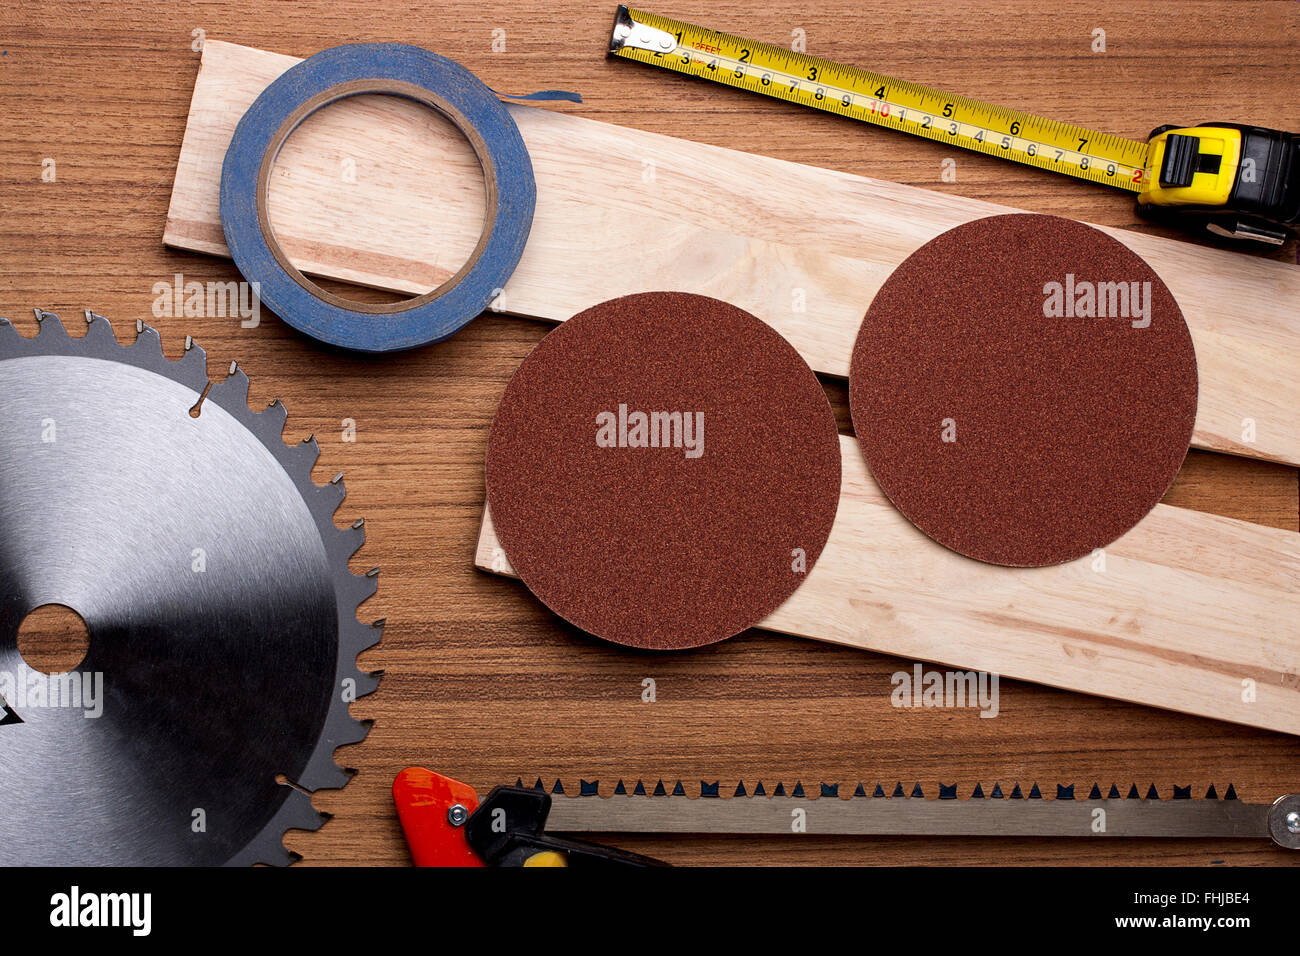 Elements of the circular on woodwork. Stock Photo